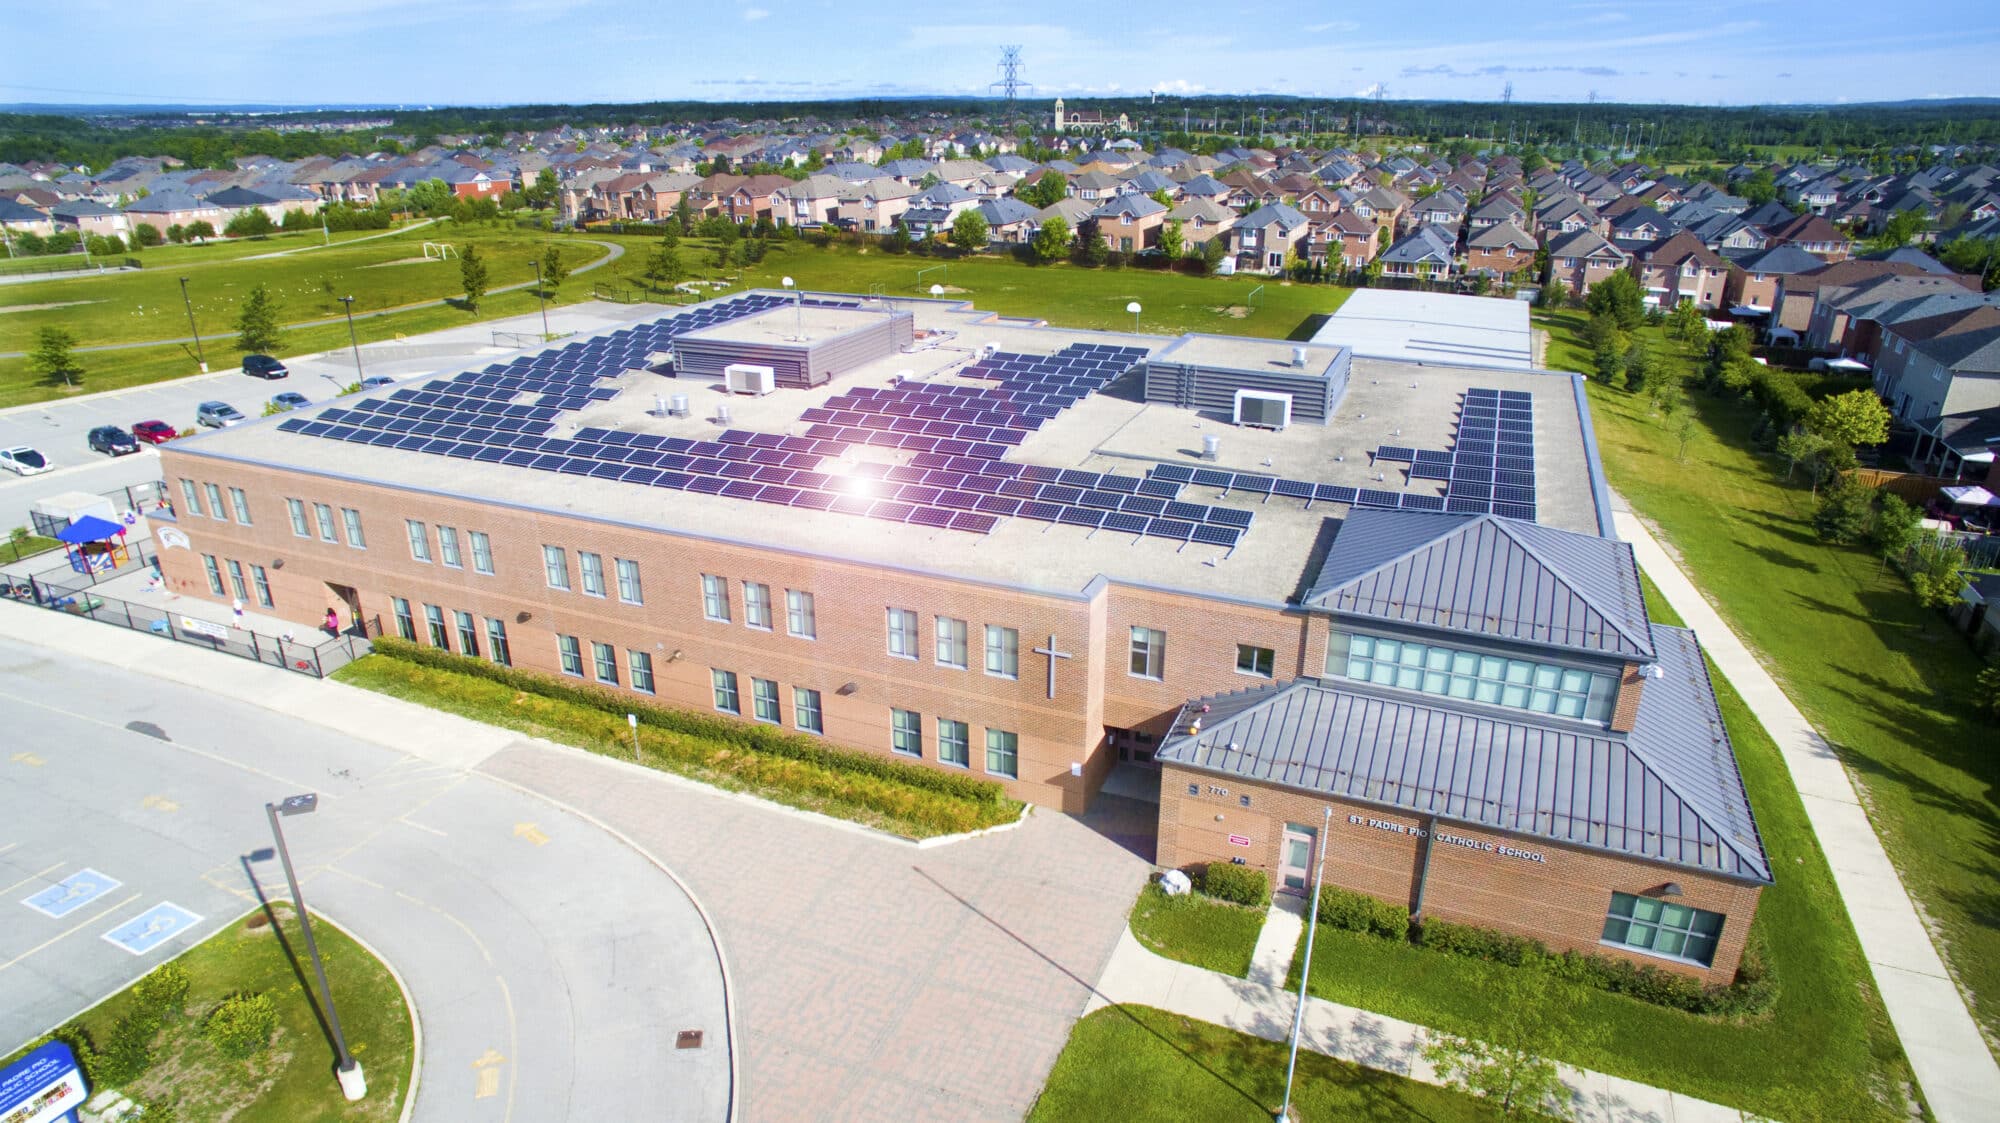 School in the suburbs that has rooftop solar panels spread across the roof. The sun is reflecting off the panels.